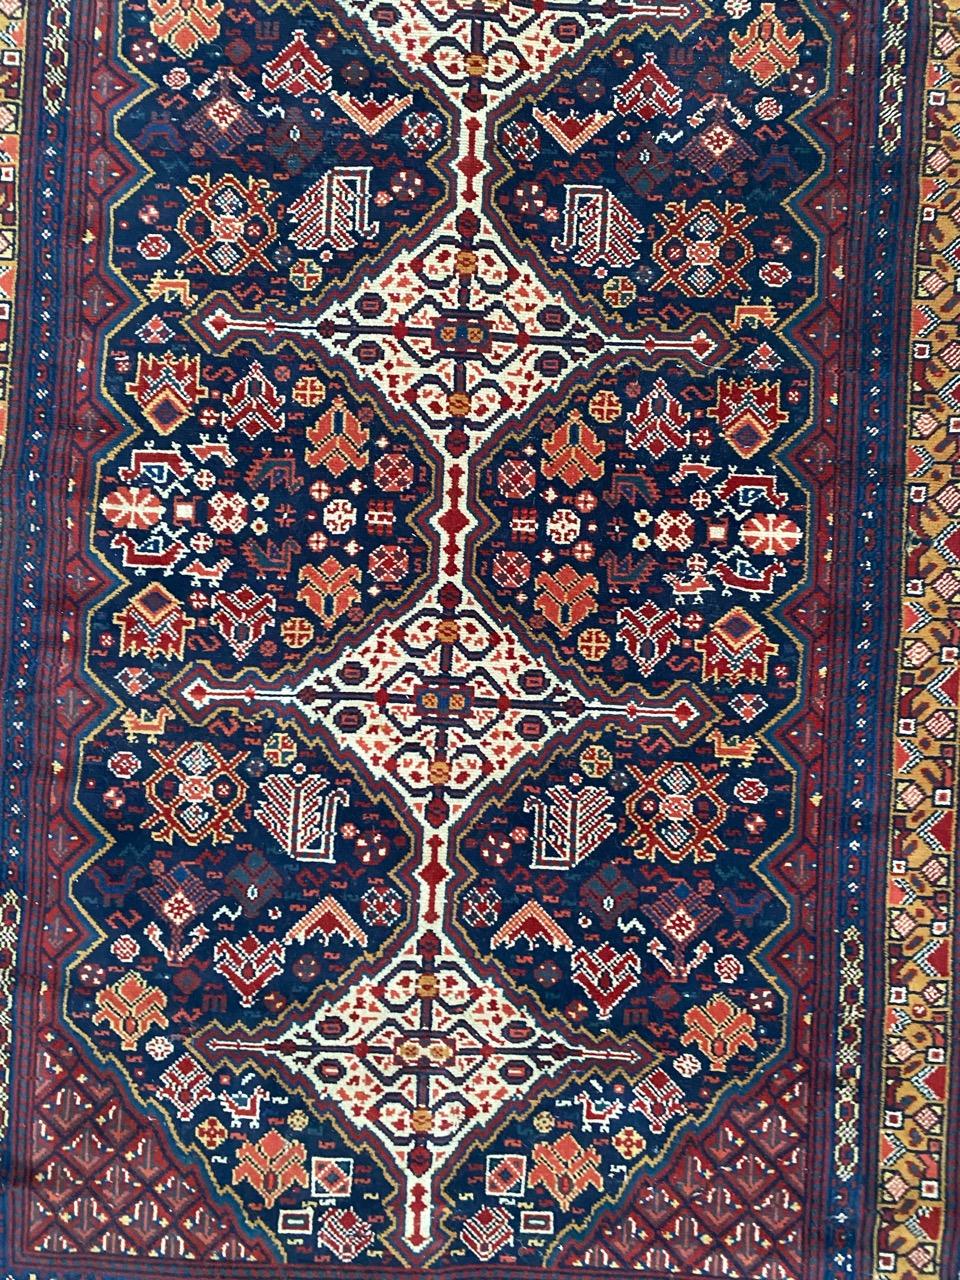 Nice mid century french knotted rug with beautiful design of Shiraz rugs and nice colors, entirely mechanical knotted with wool velvet on cotton foundation.

✨✨✨
